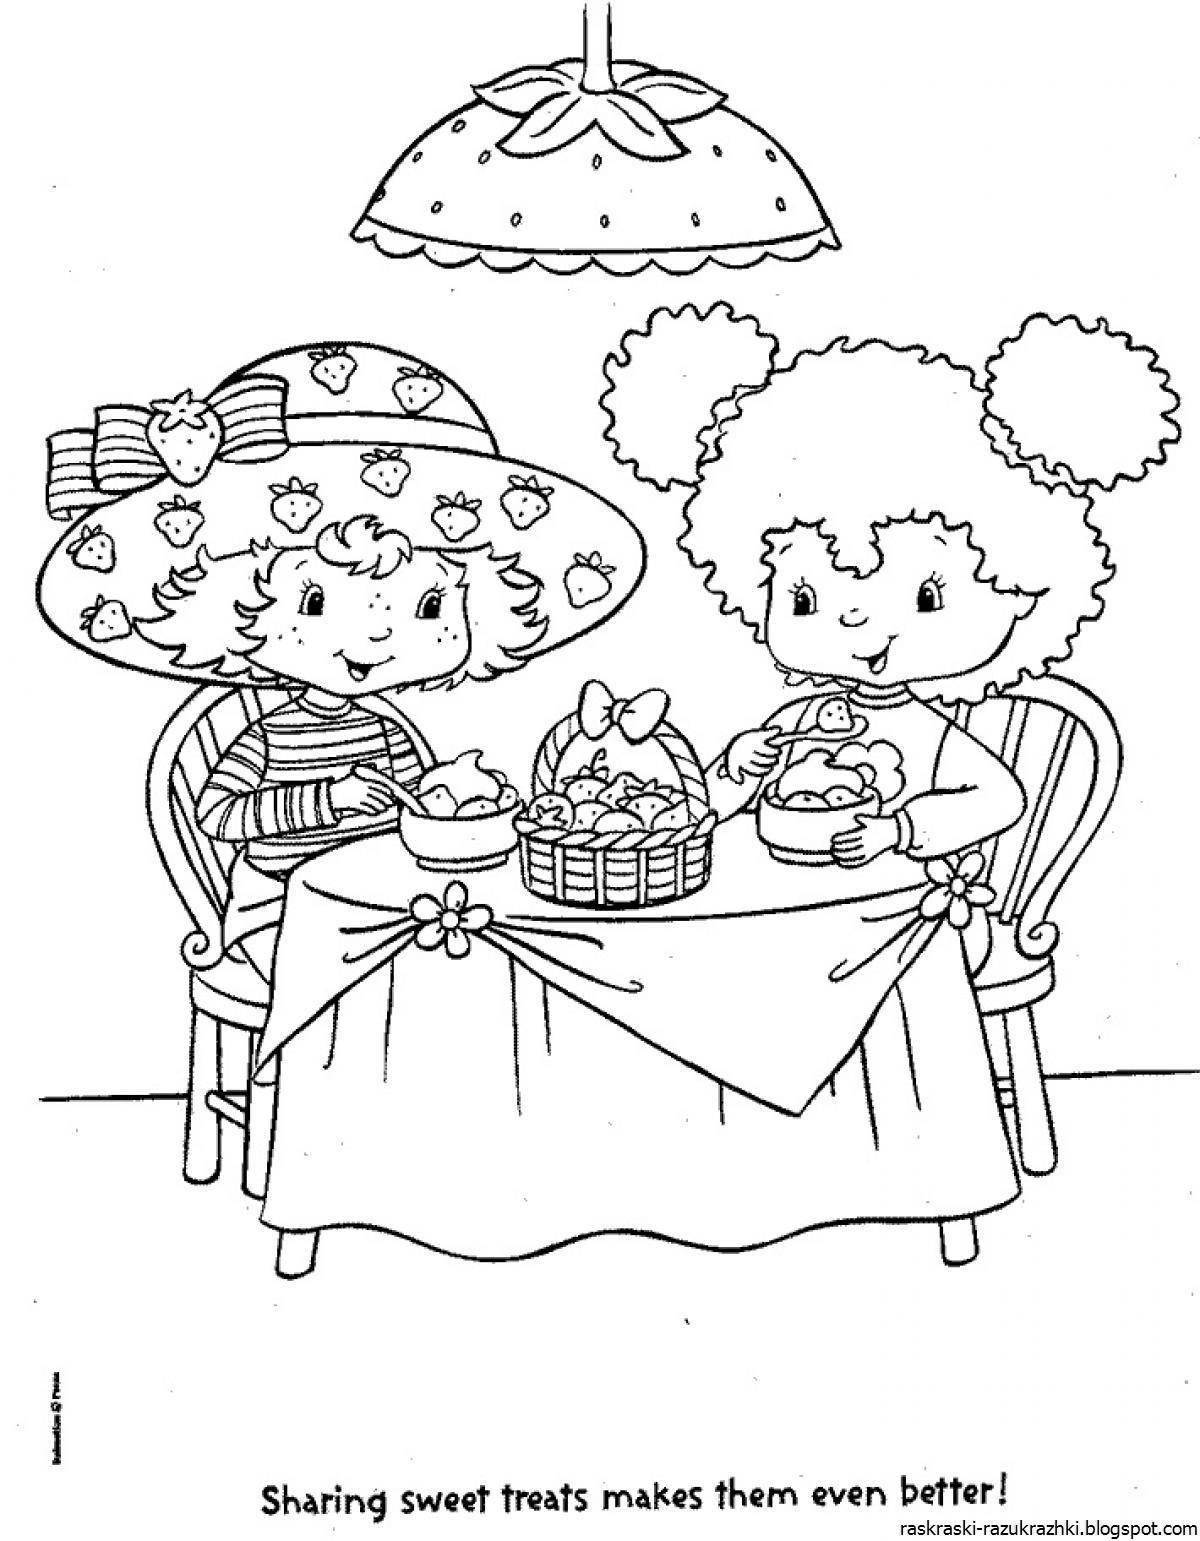 Fun etiquette coloring book for 4-5 year olds